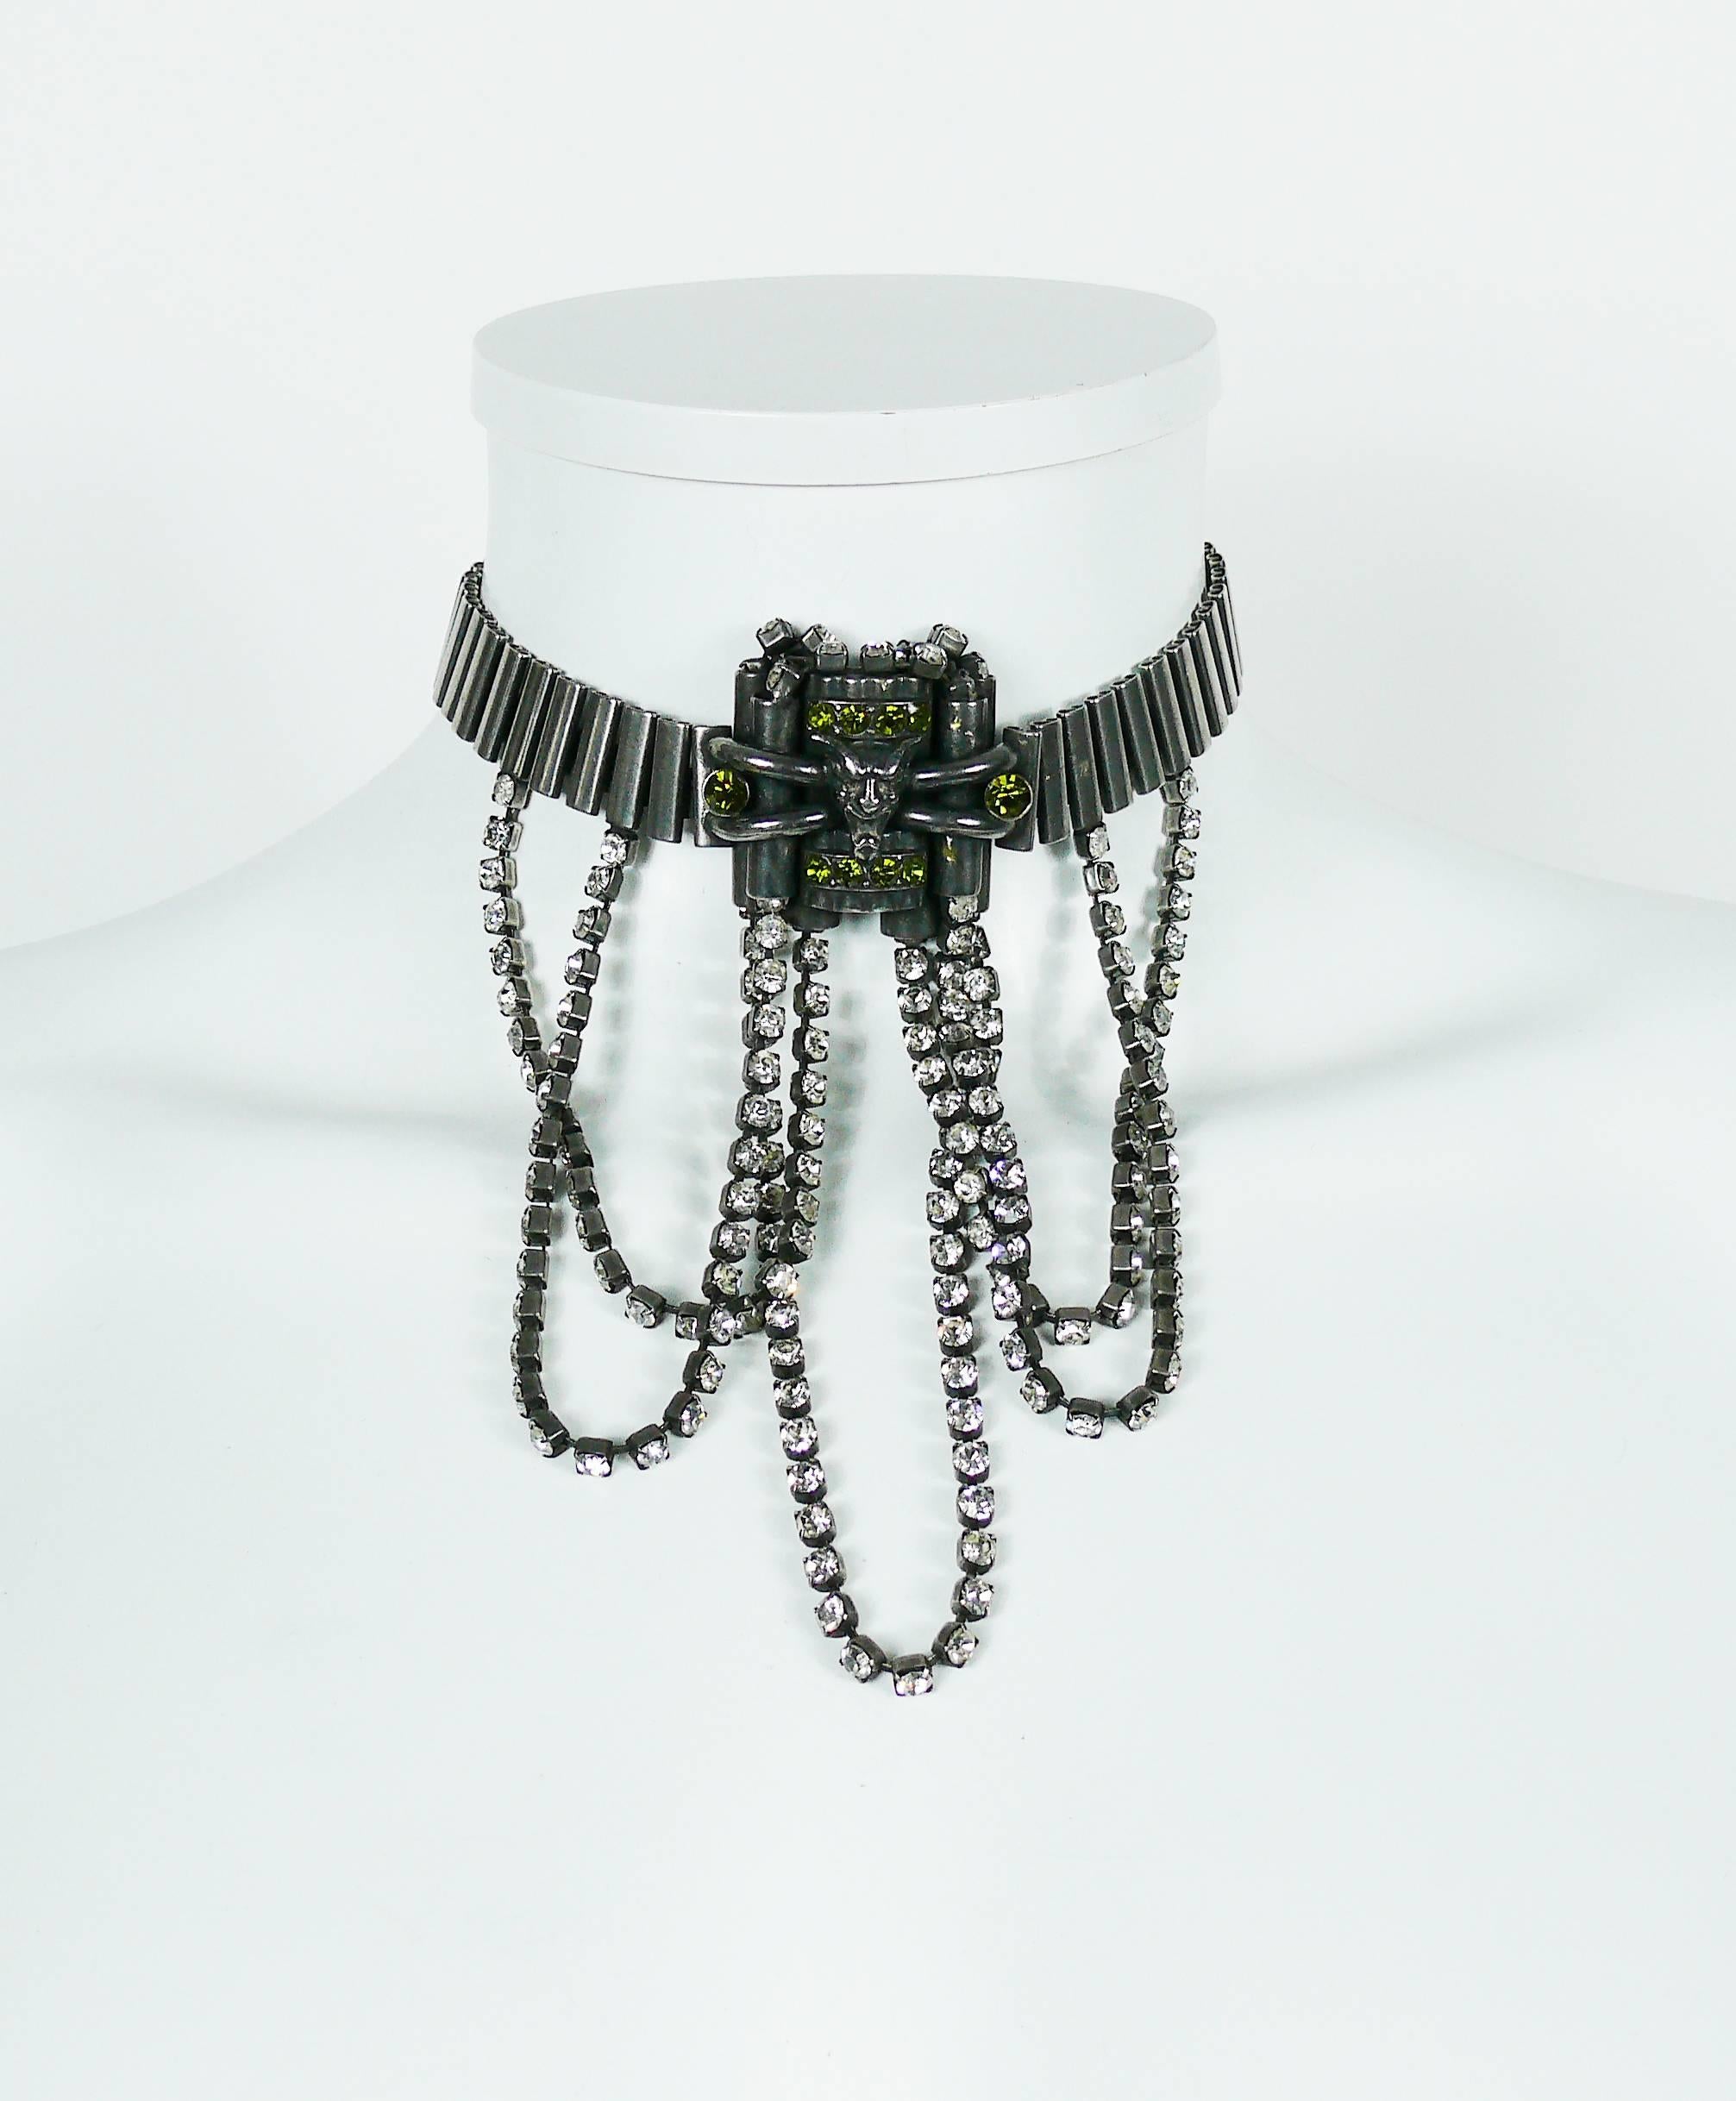 JEAN PAUL GAULTIER vintage gun patina dog collar necklace featuring cascading clear crystal chains, green crystals and demon mask at center.

Lobster clasp closure.
Extension chain.

Unmarked.
Matching signed clip-on earrings available on our